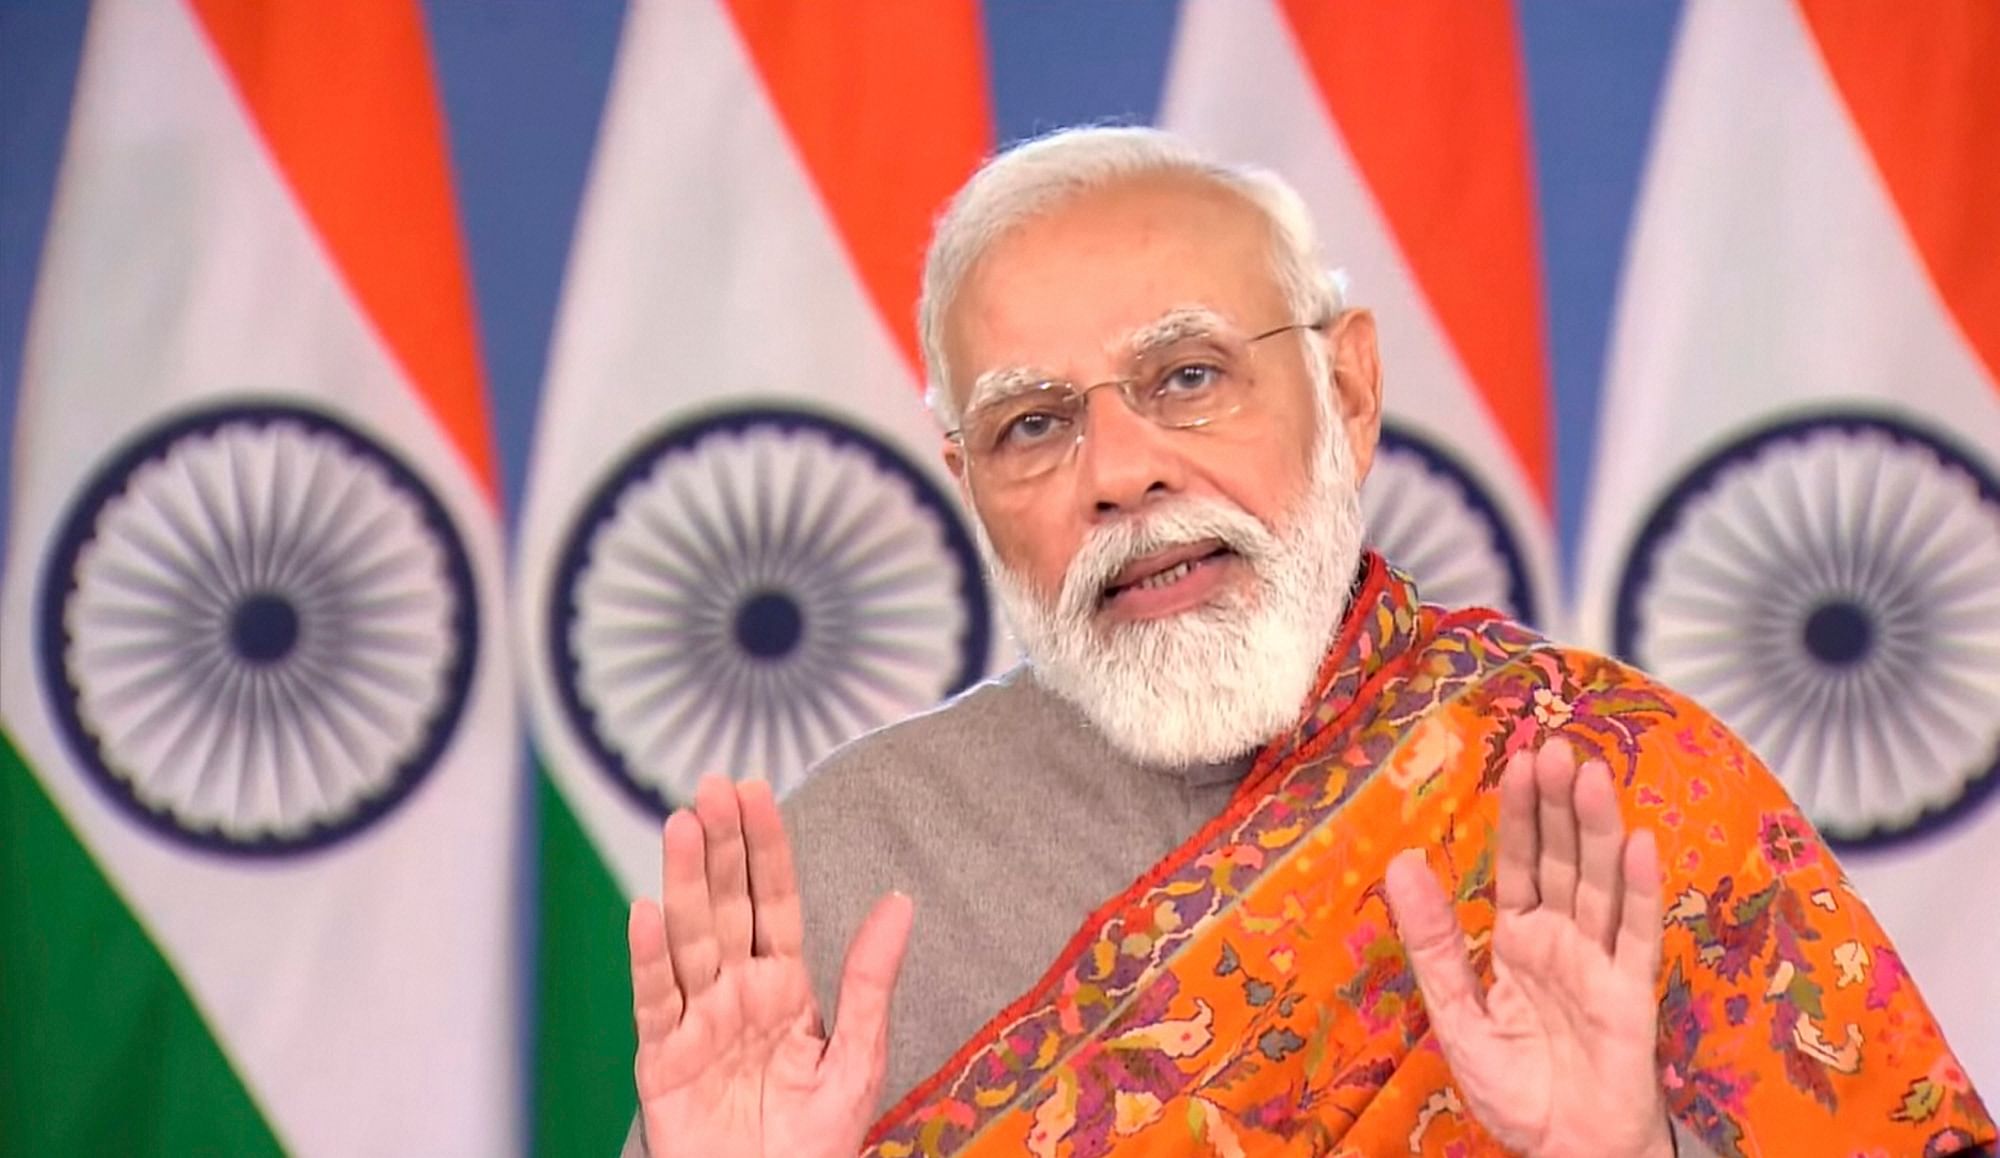 <div class="paragraphs"><p>New Delhi: Prime Minister Narendra Modi during his address to the nation, in New Delhi, Friday, Nov 19, 2021. PM Modi announced that the three contentious farm laws will be repealed.</p></div>